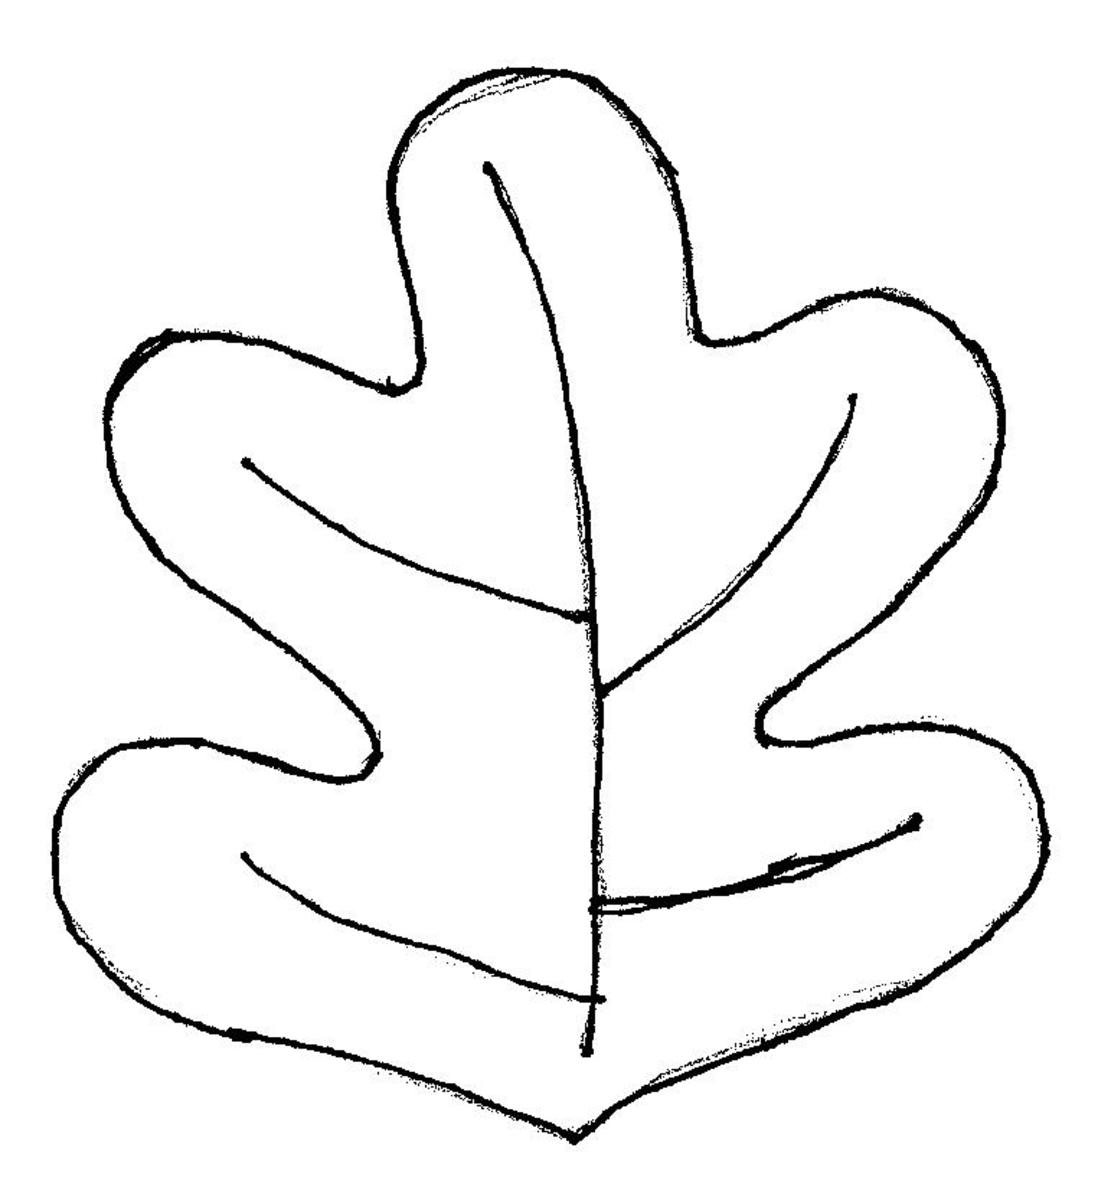 This is a template for the scrap fabric oak leaf decoration.